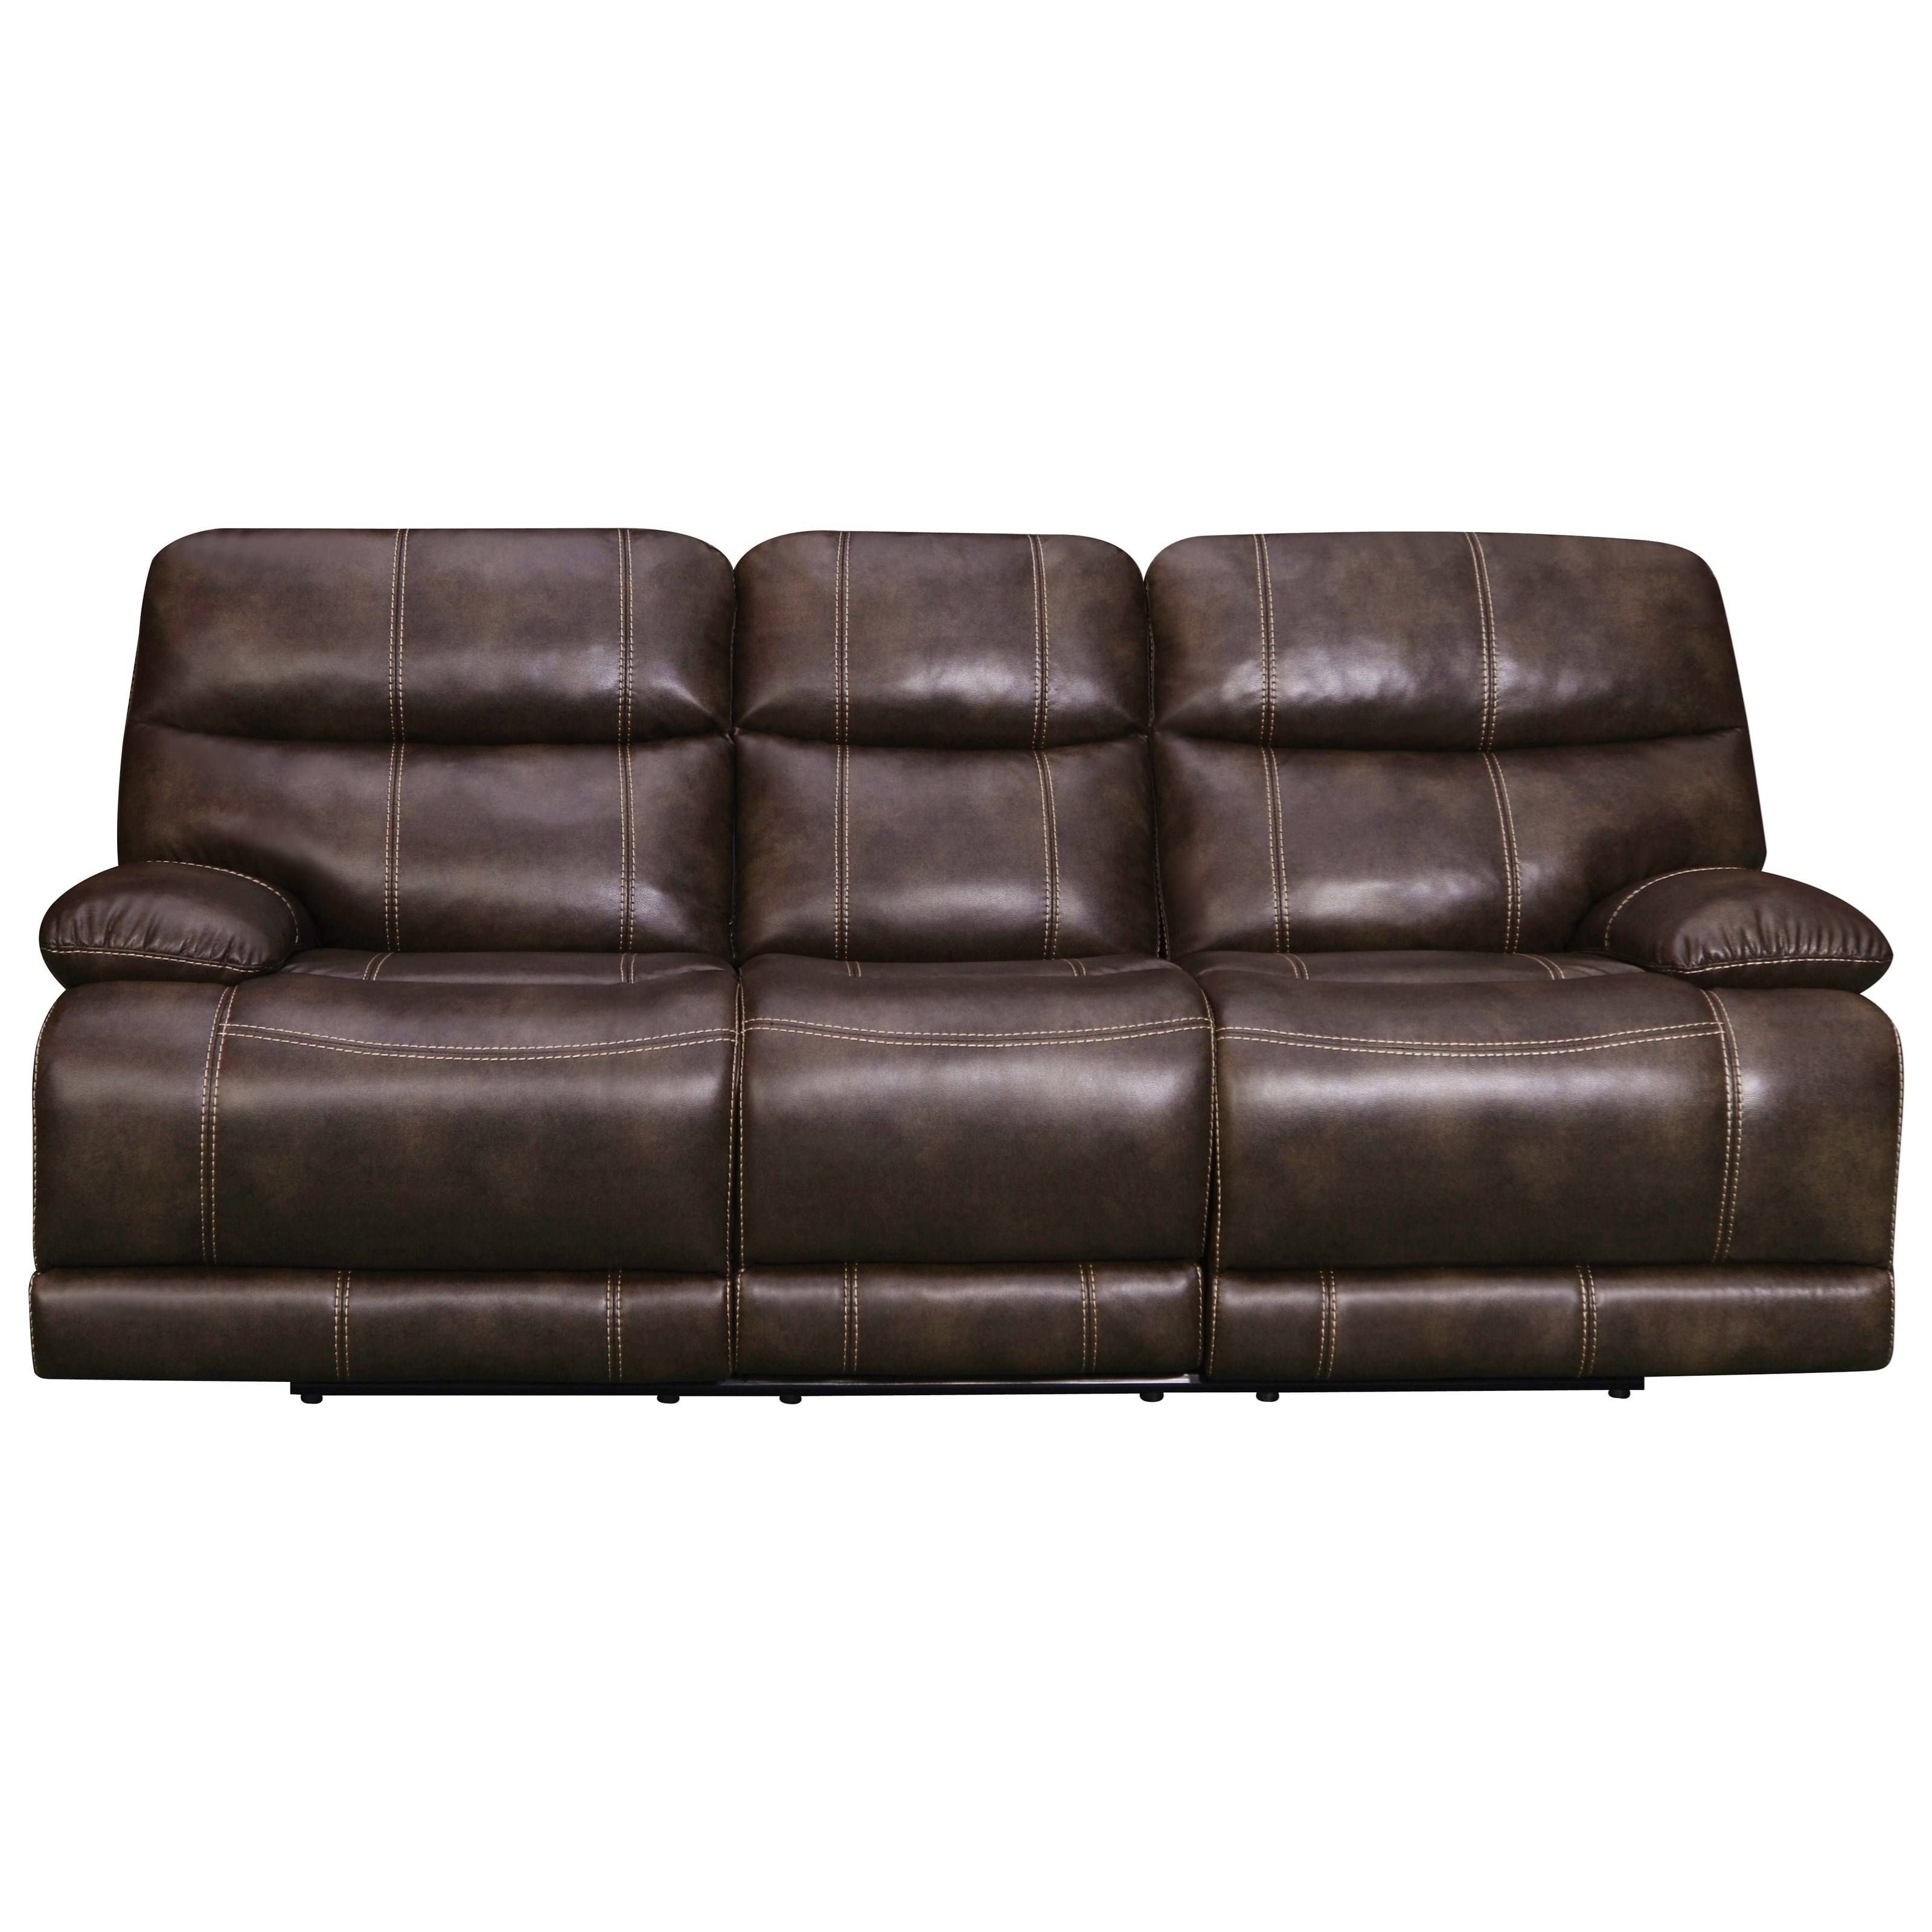 Reclining Sofas | Capital Region, Albany, Capital District Pertaining To Cheers Recliner Sofas (View 10 of 15)